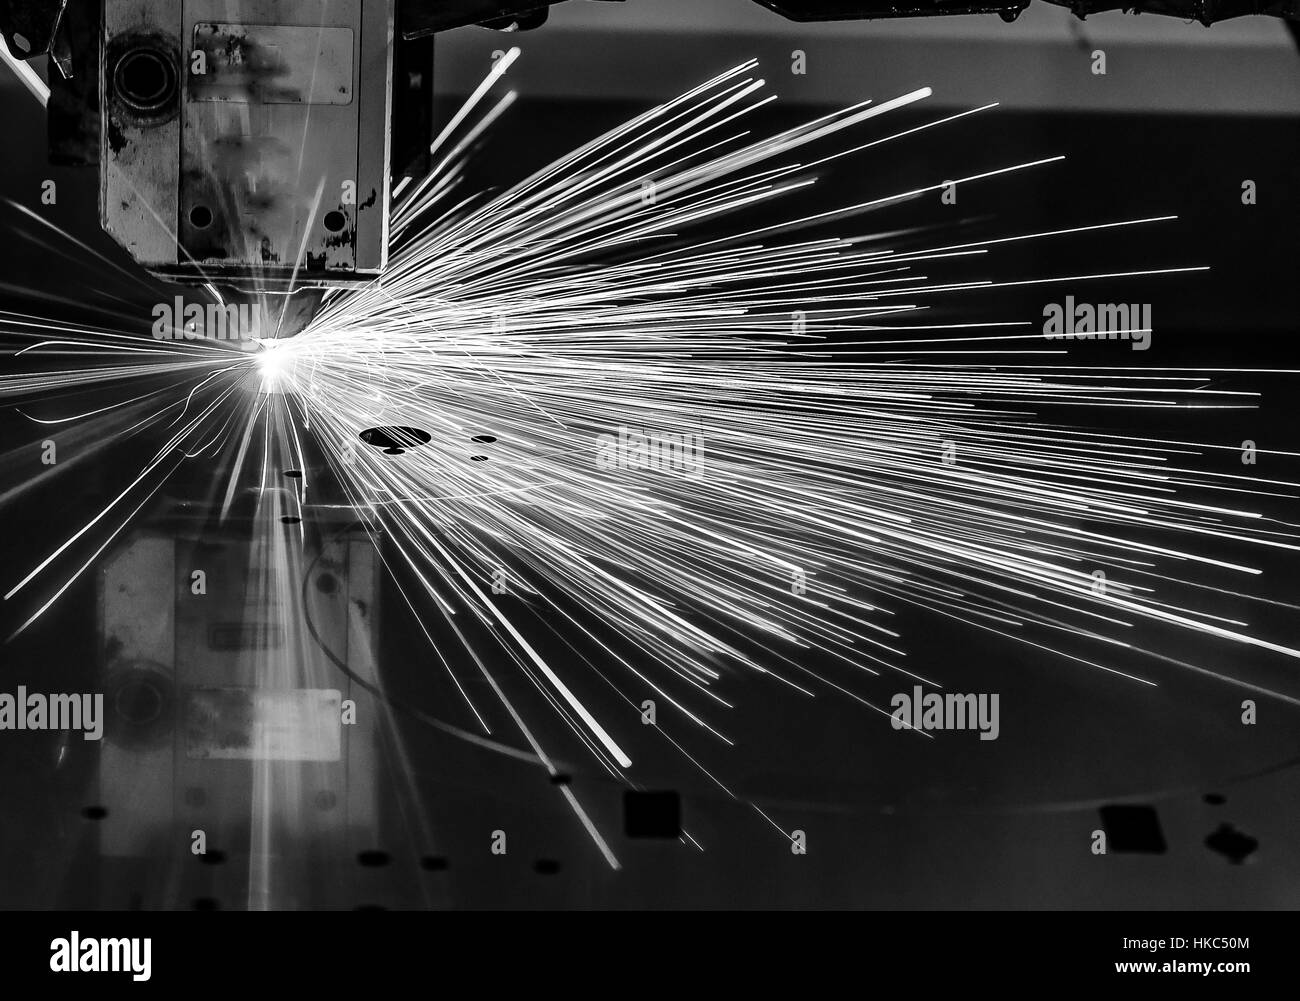 Industrial Laser cutting processing manufacture technology of flat sheet  metal steel material with sparks laser cut metal splashes Stock Photo -  Alamy